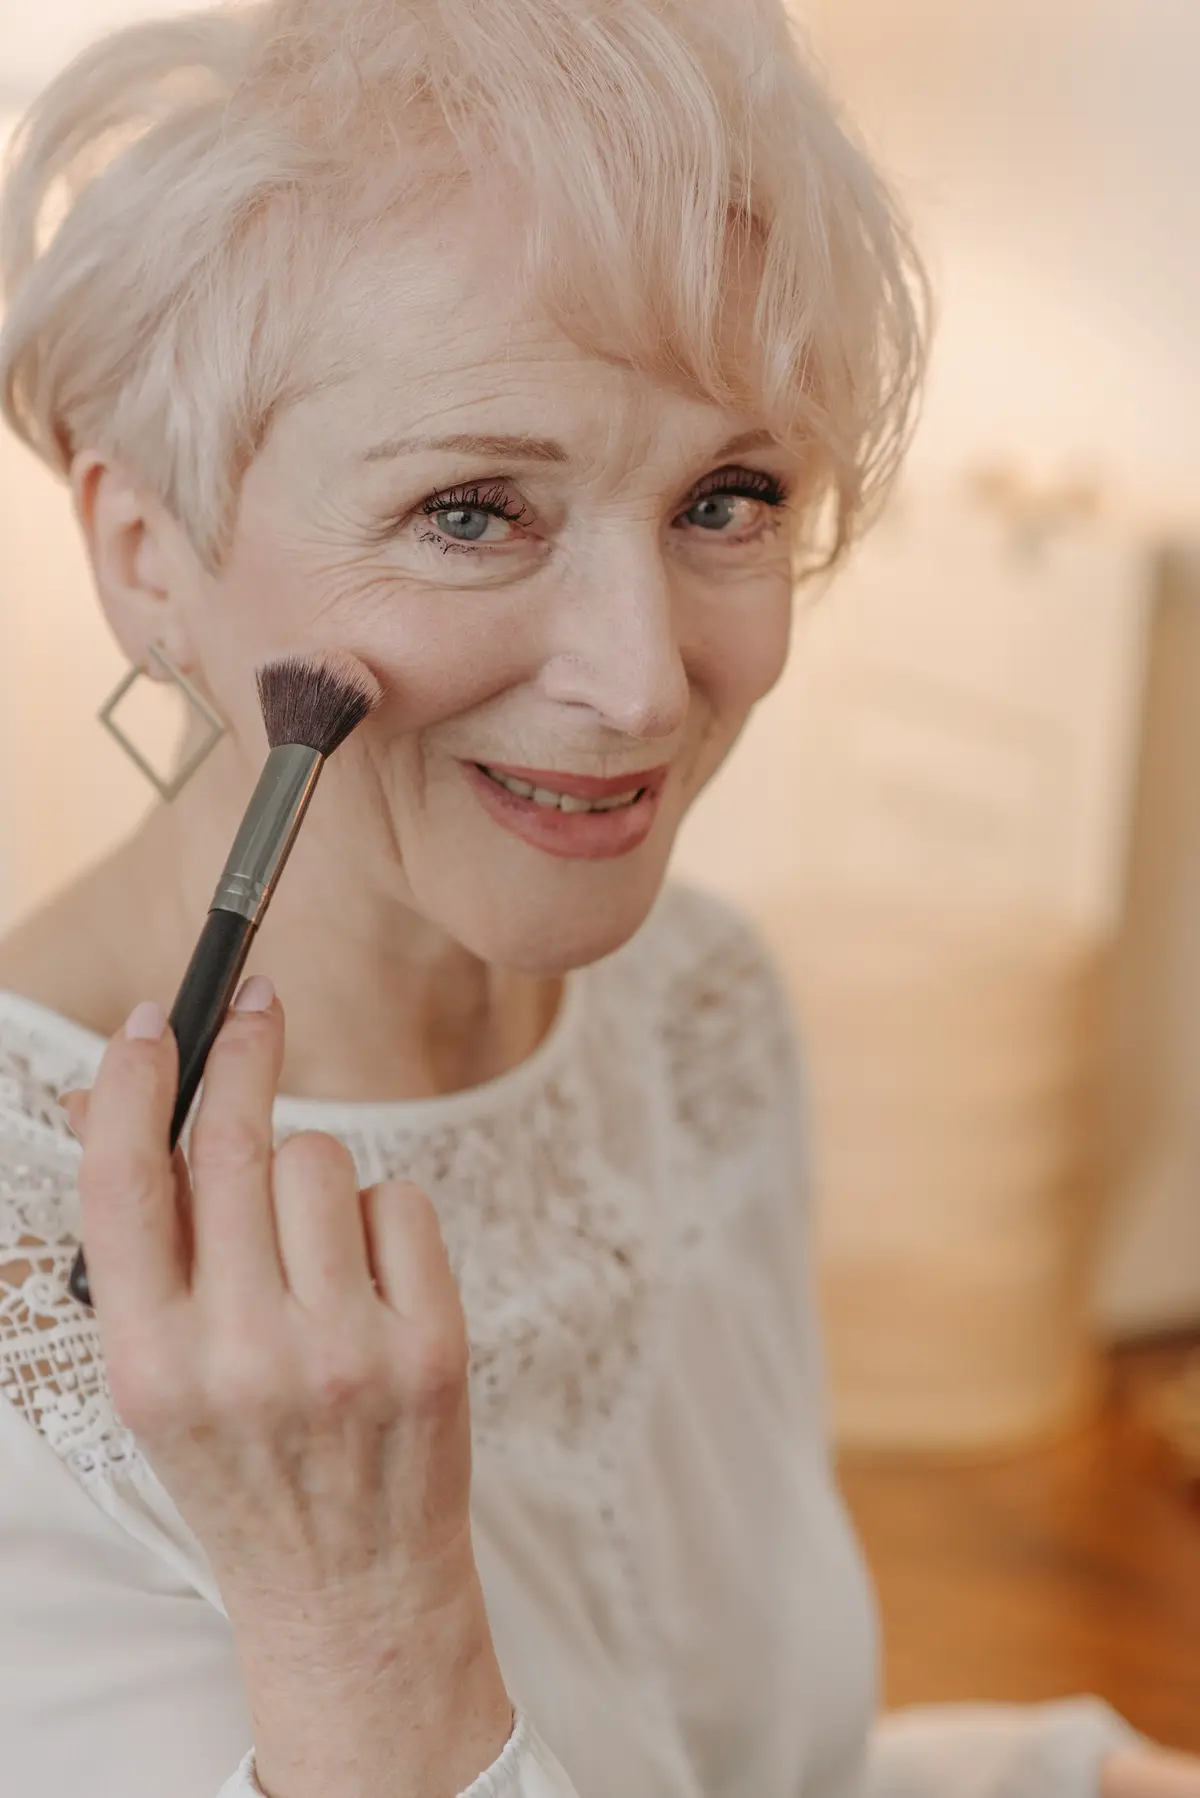 what are the biggest errors in applying makeup that women over 50 make